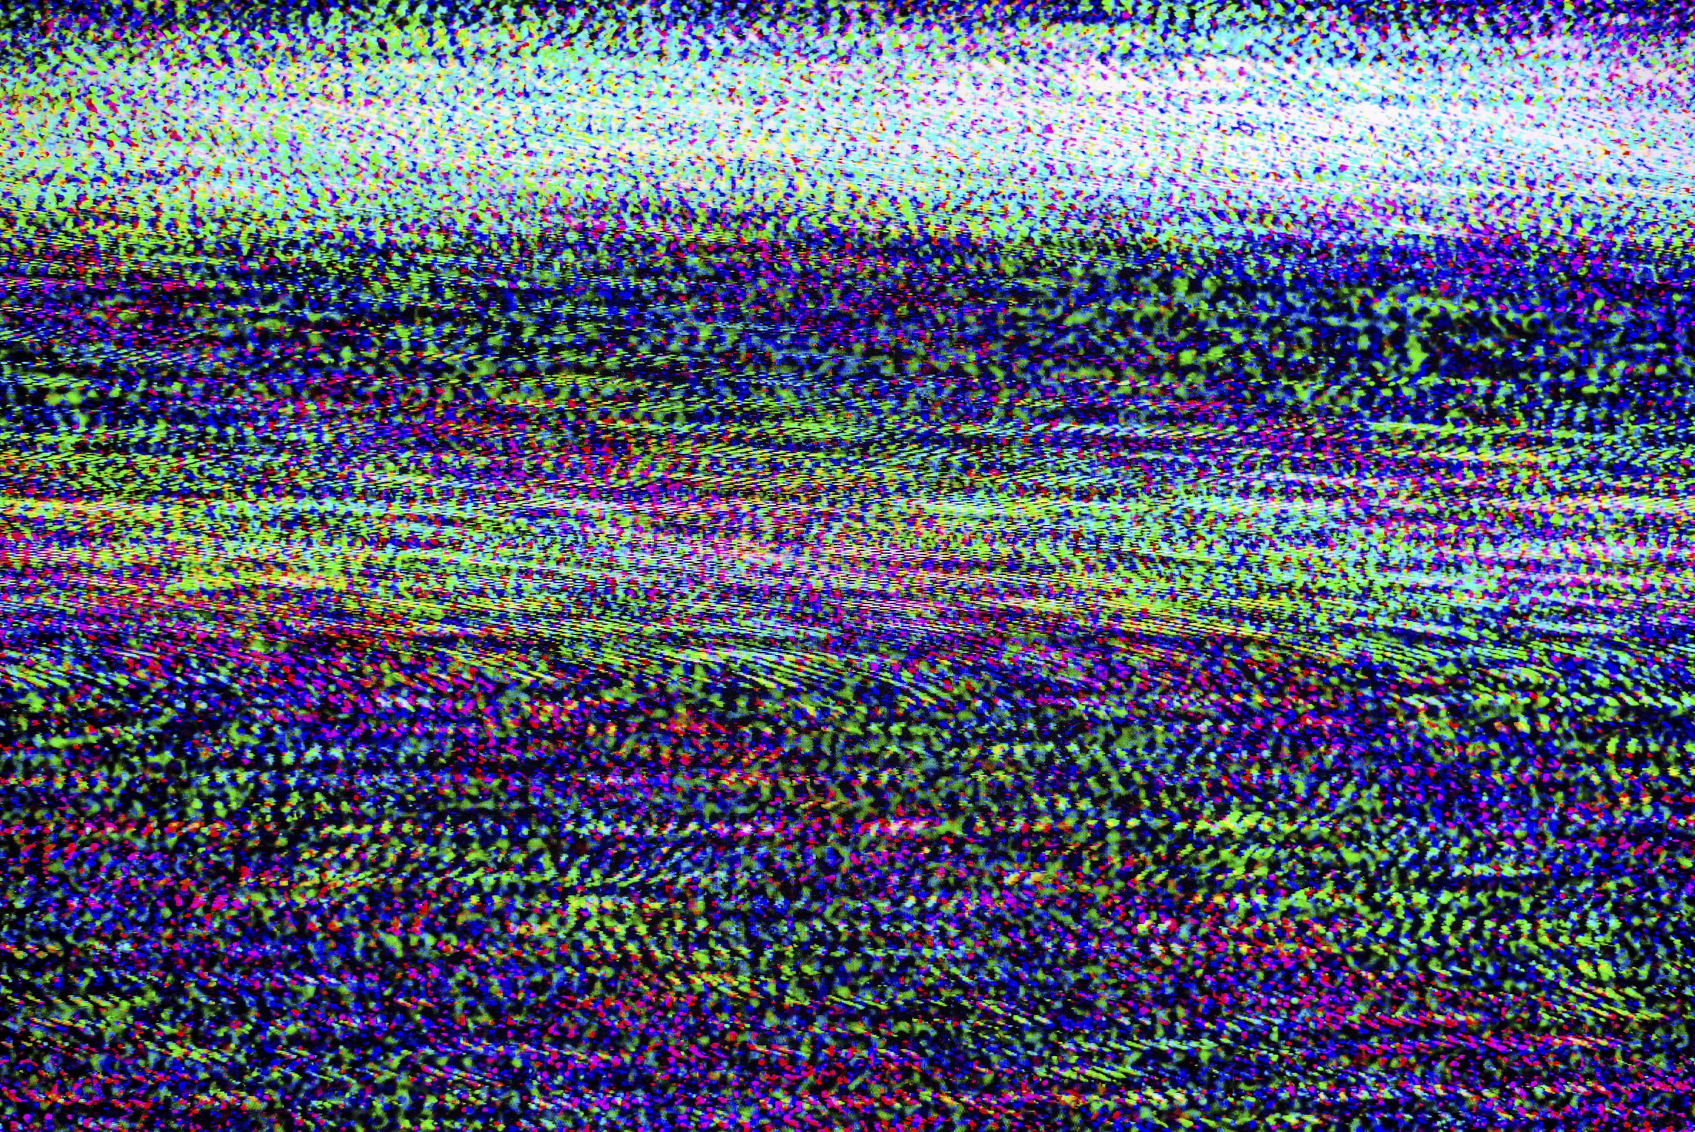 TV damage, bad sync TV channel, RGB LCD television screen with static noise from poor broadcast signal reception as analogue technology background.